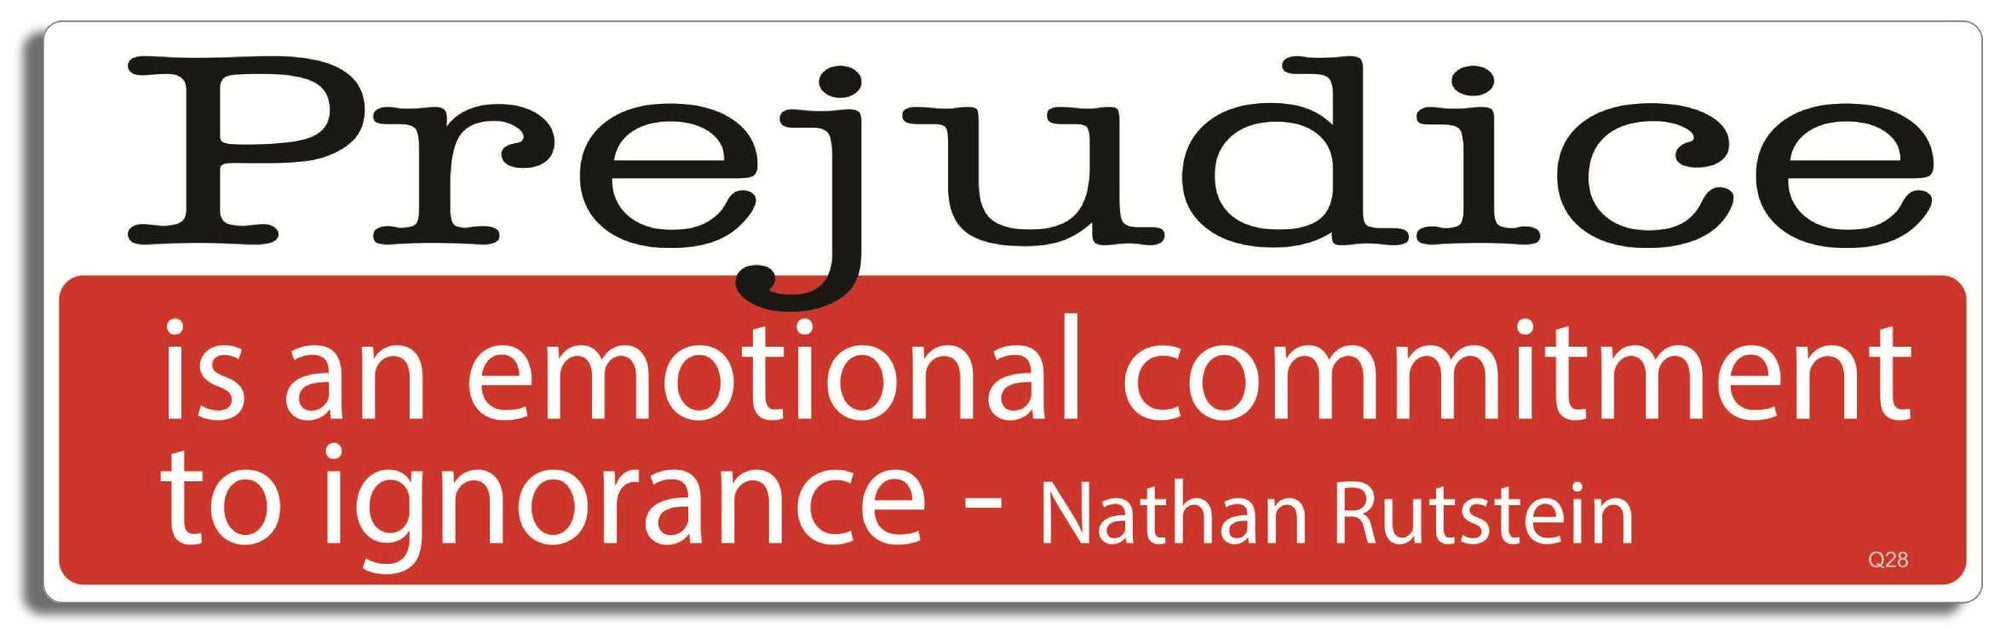 Prejudice is an emotional commitment to ignorance - Nathan Rutstein - 3" x 10" Bumper Sticker--Car Magnet- -  Decal Bumper Sticker-quotation Bumper Sticker Car Magnet Prejudice is an emotional commitment-  Decal for carsquotation, quote